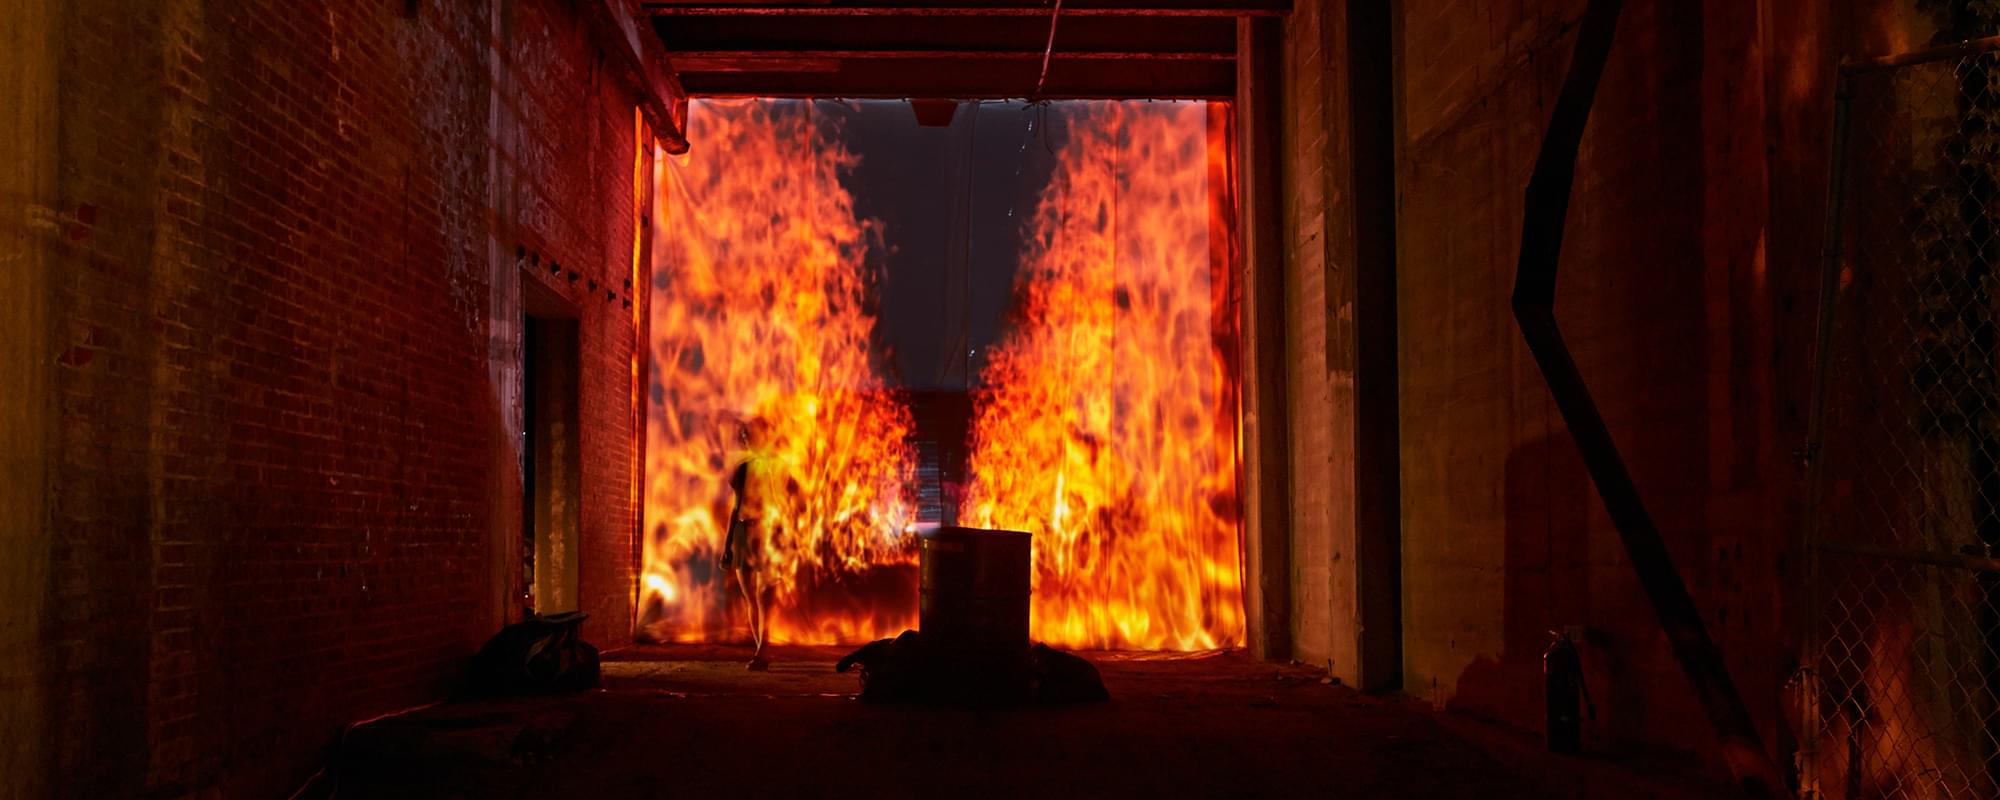 Nightime photograph of a tunnel onto which is projected a faux 3D perspective of an firescape streching backwards in a narrow column into infinity